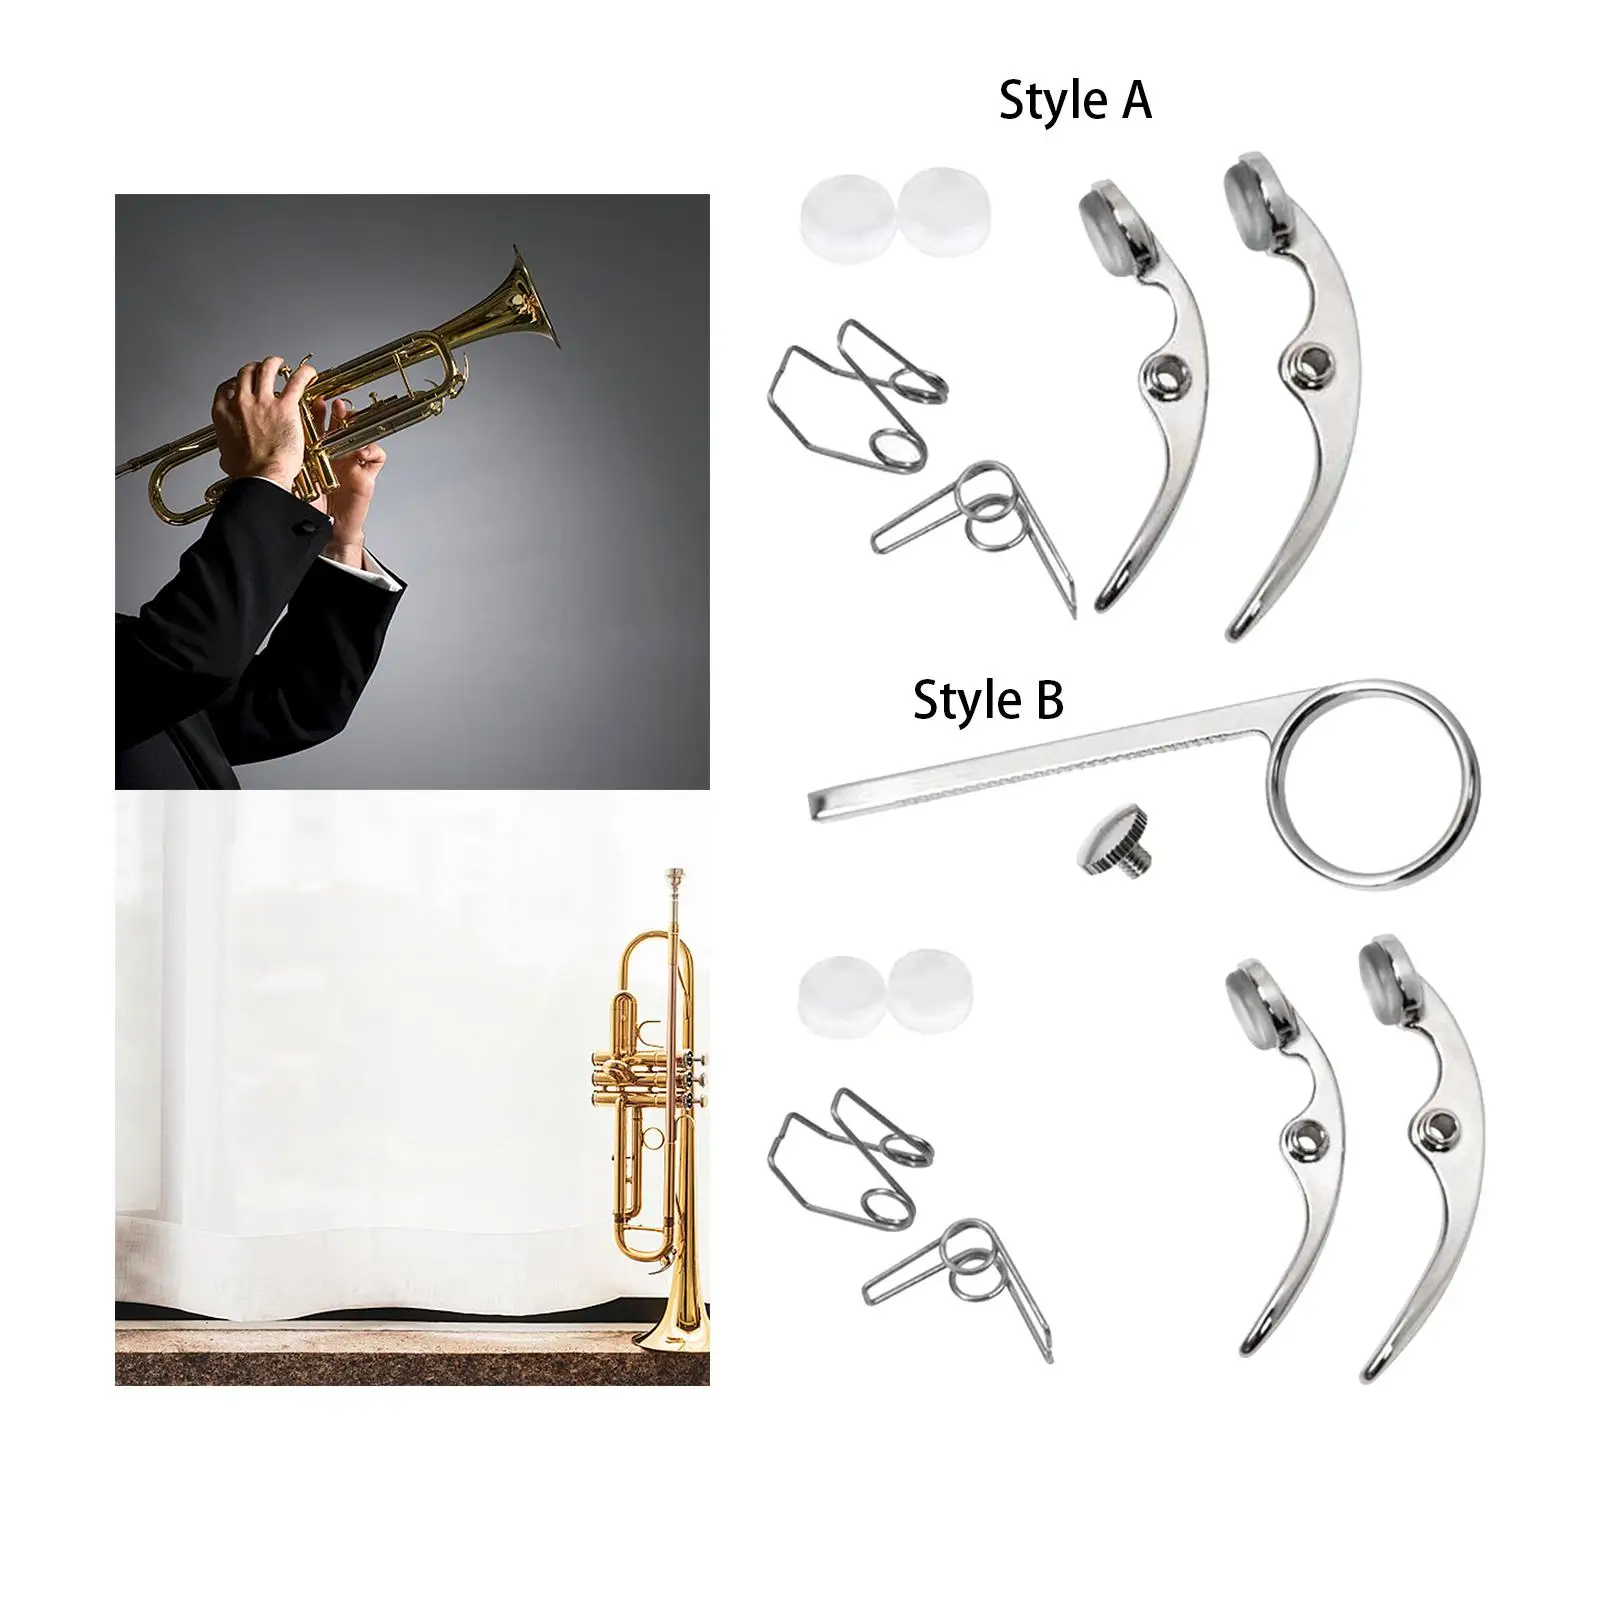 Professional Trumpet Water Value Value Accessory Replacement Parts Trumpet Maintenance Repairing Repair Tool for Wind Instrument